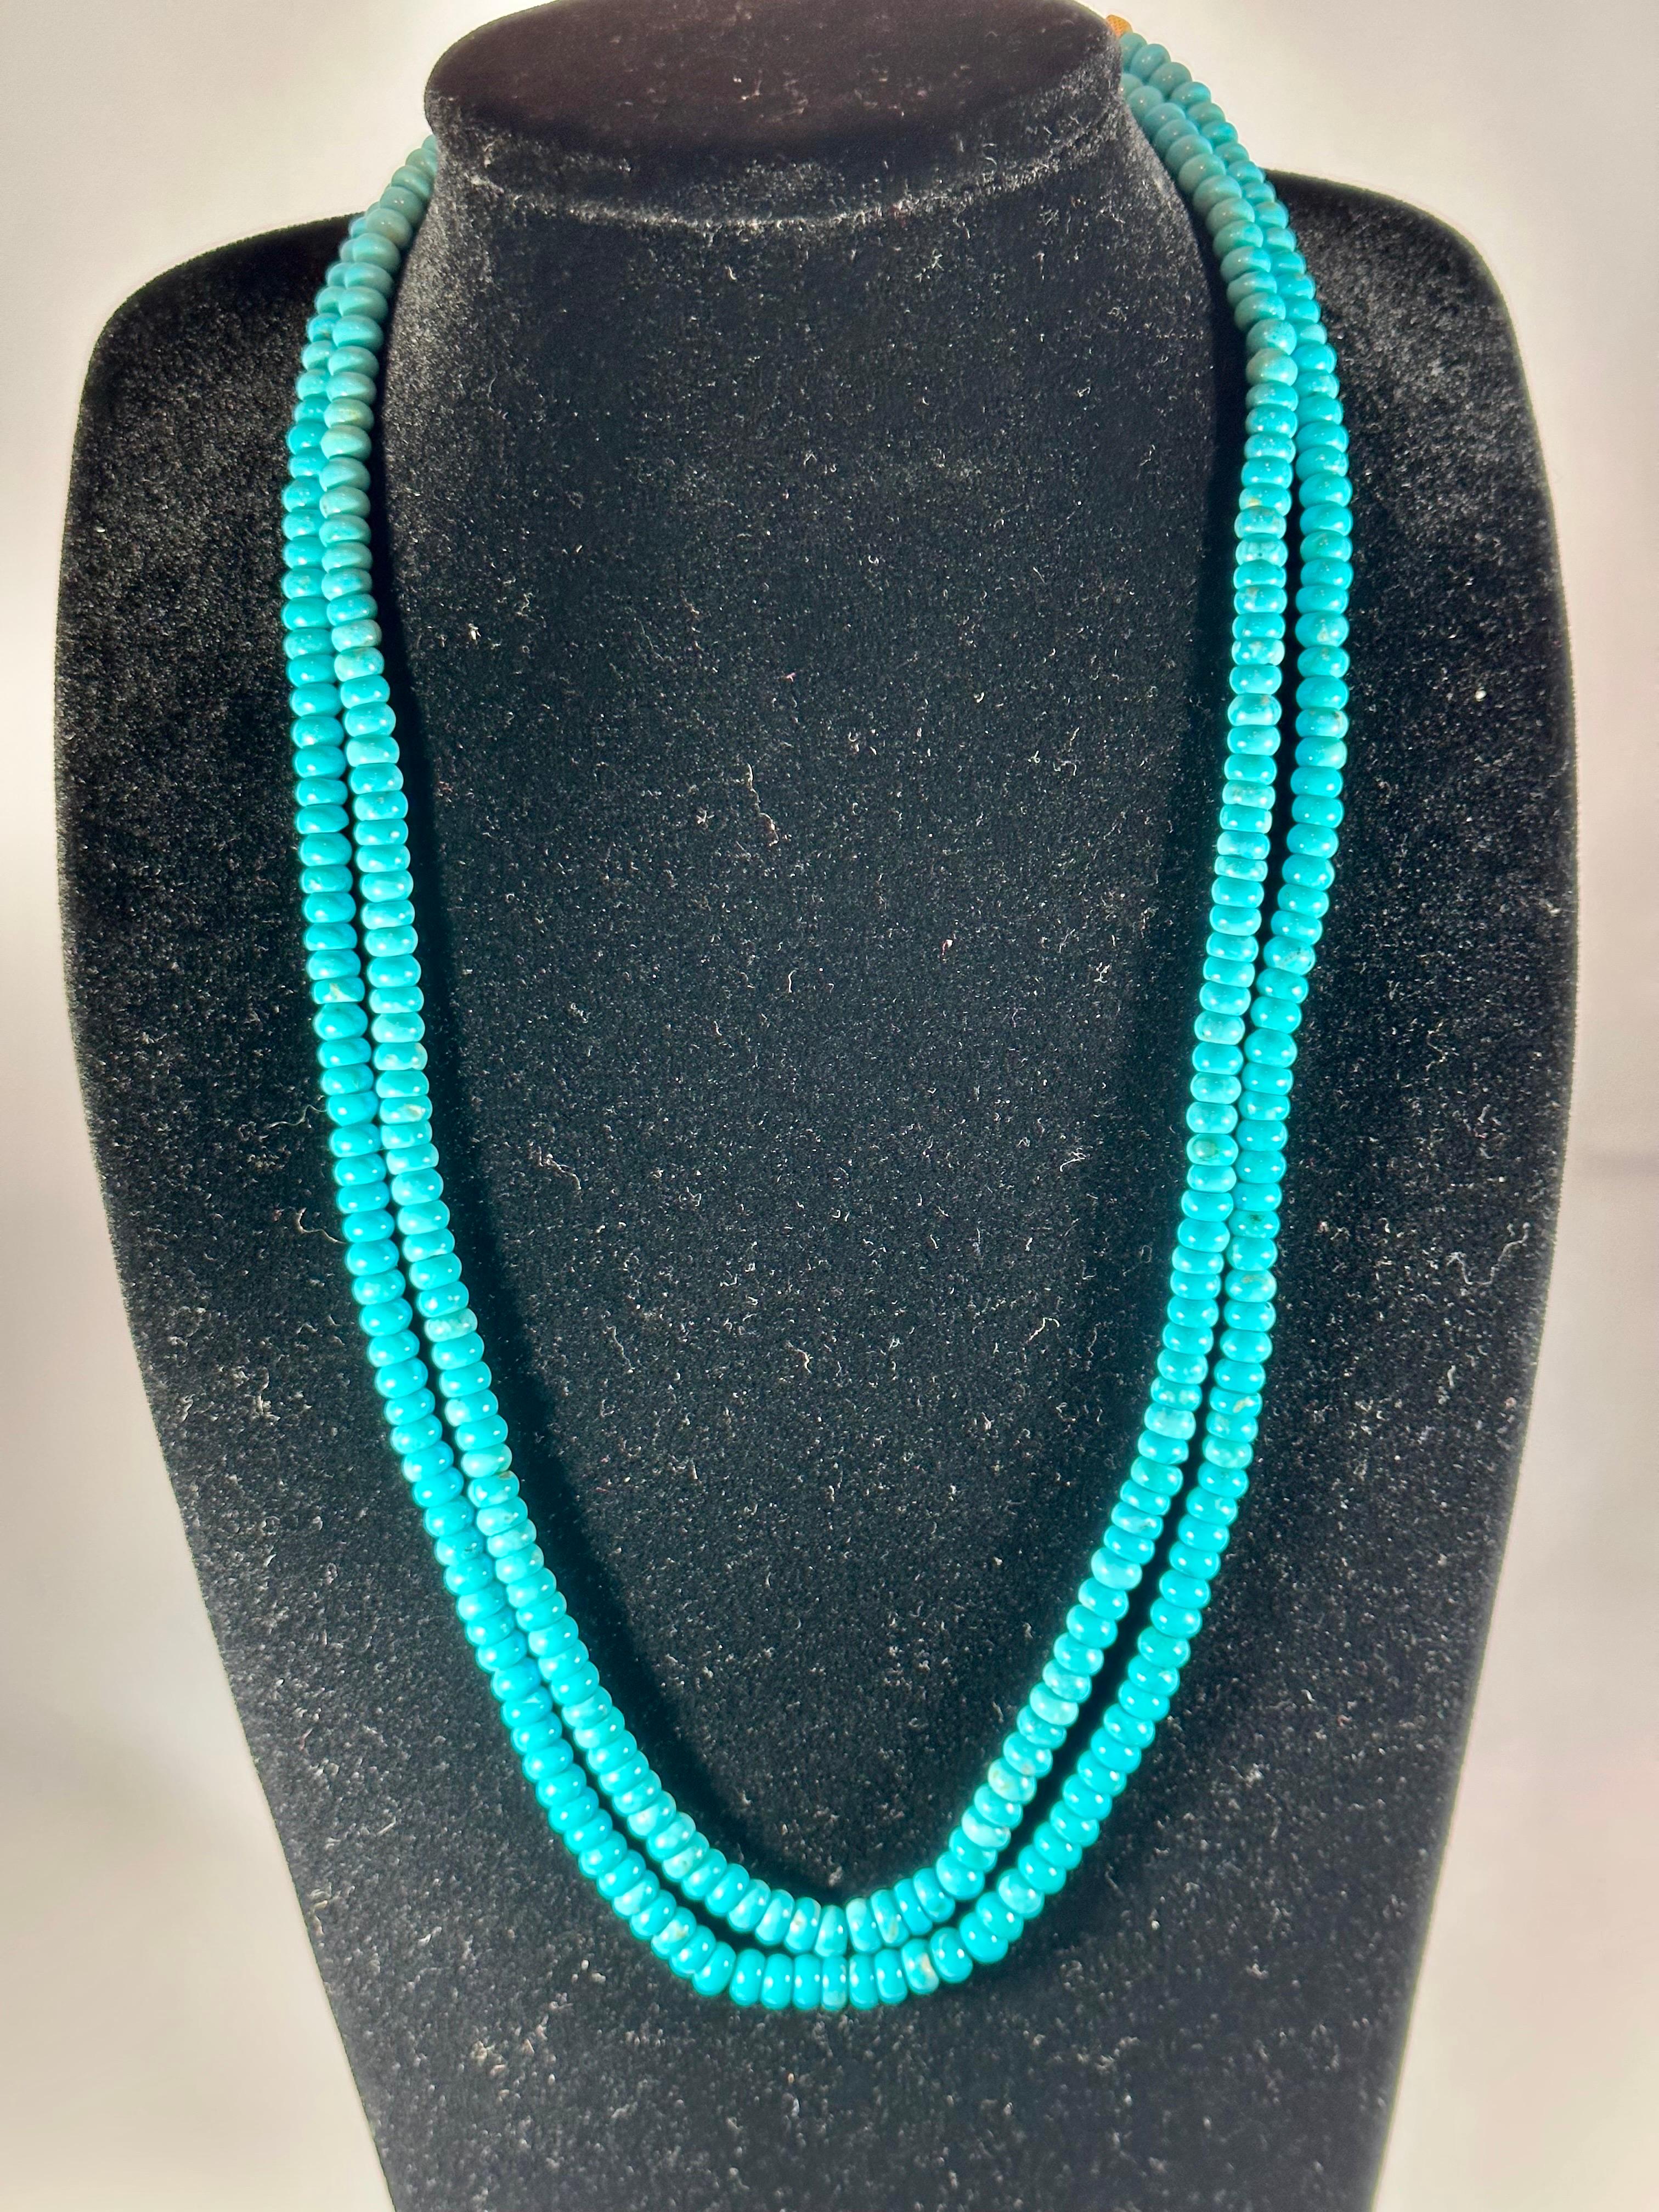 215 Carat Natural Sleeping Beauty Turquoise Necklace, Two Strand 14 Karat Gold For Sale 8